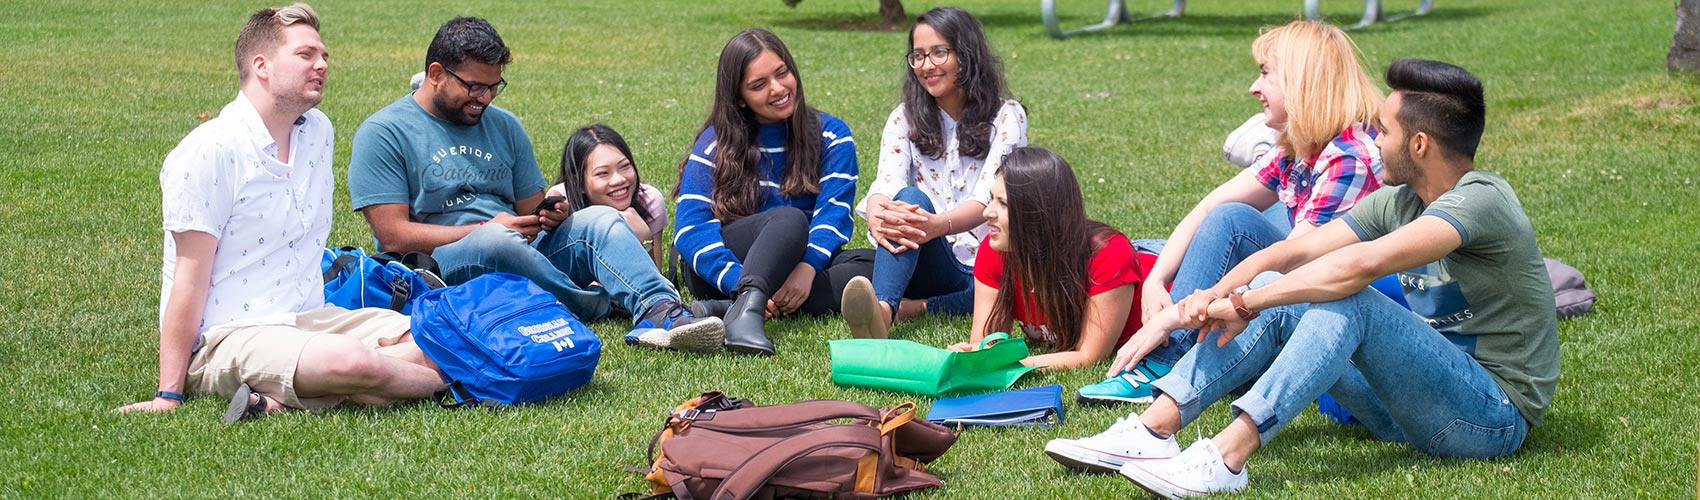 A group of eight international students sitting on the grass with backpacks and binders in between classes at the Barrie Campus